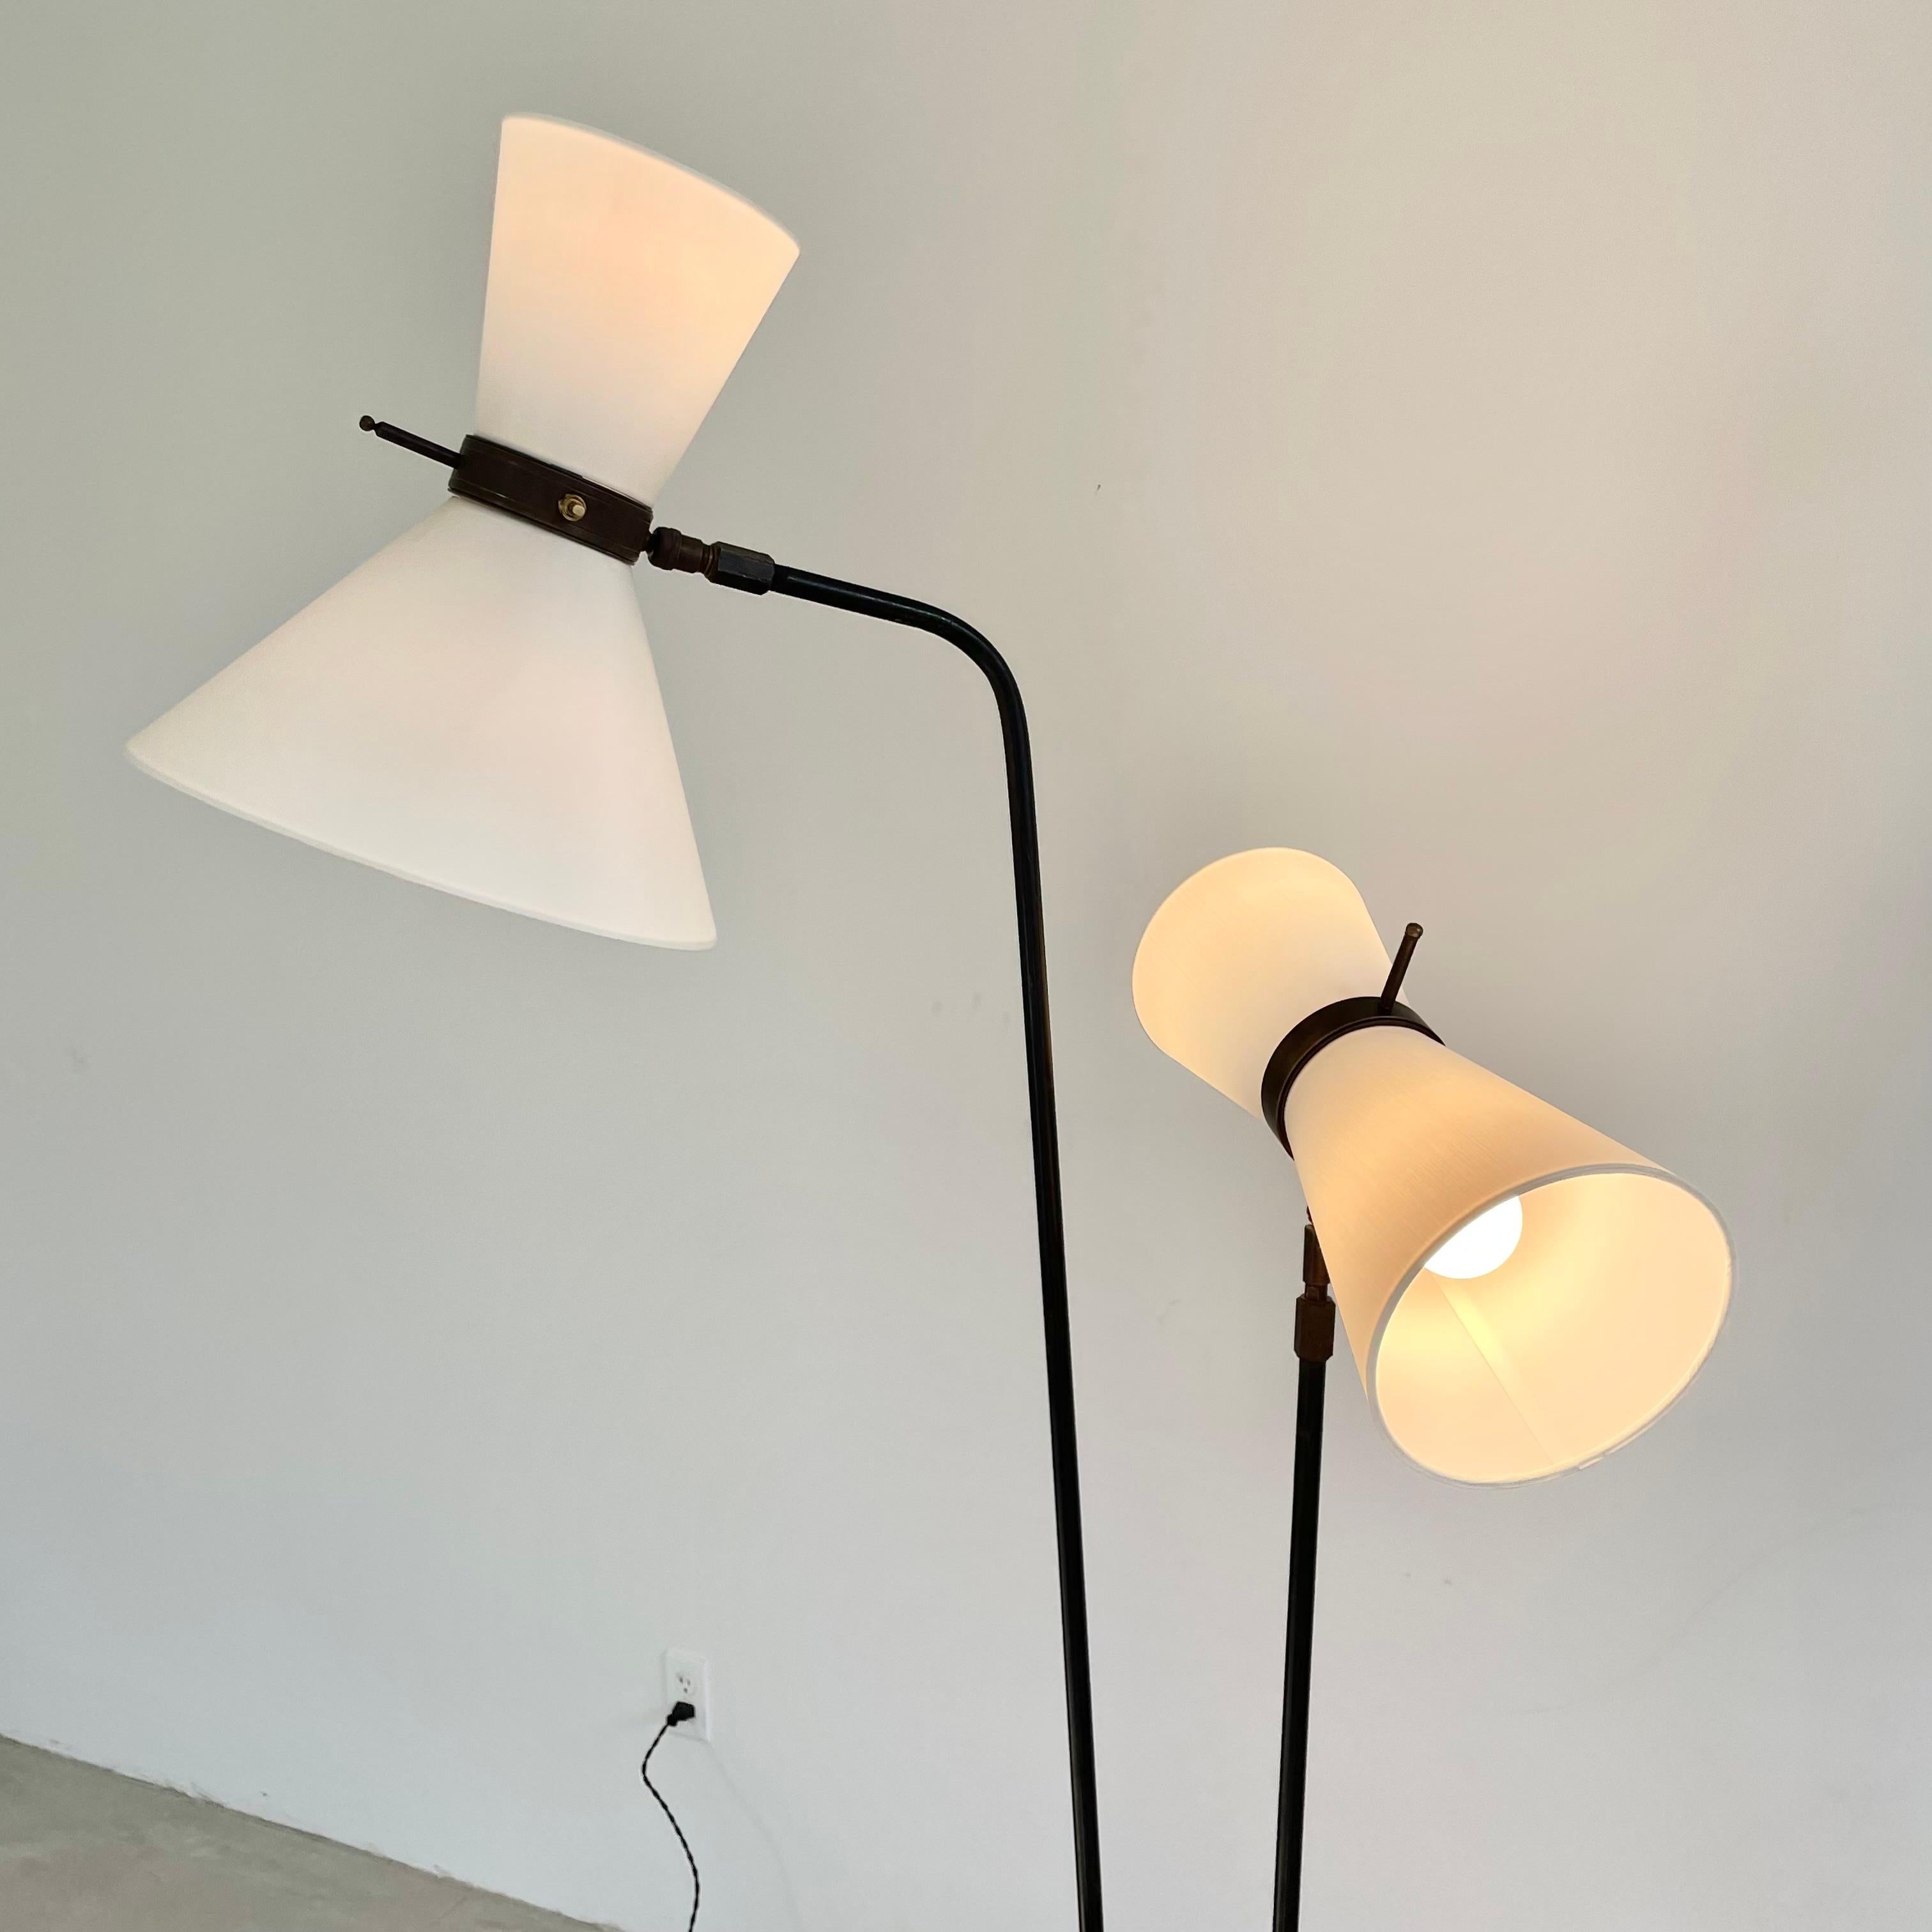 Double Headed Articulating Floor Lamp, 1950s France For Sale 8